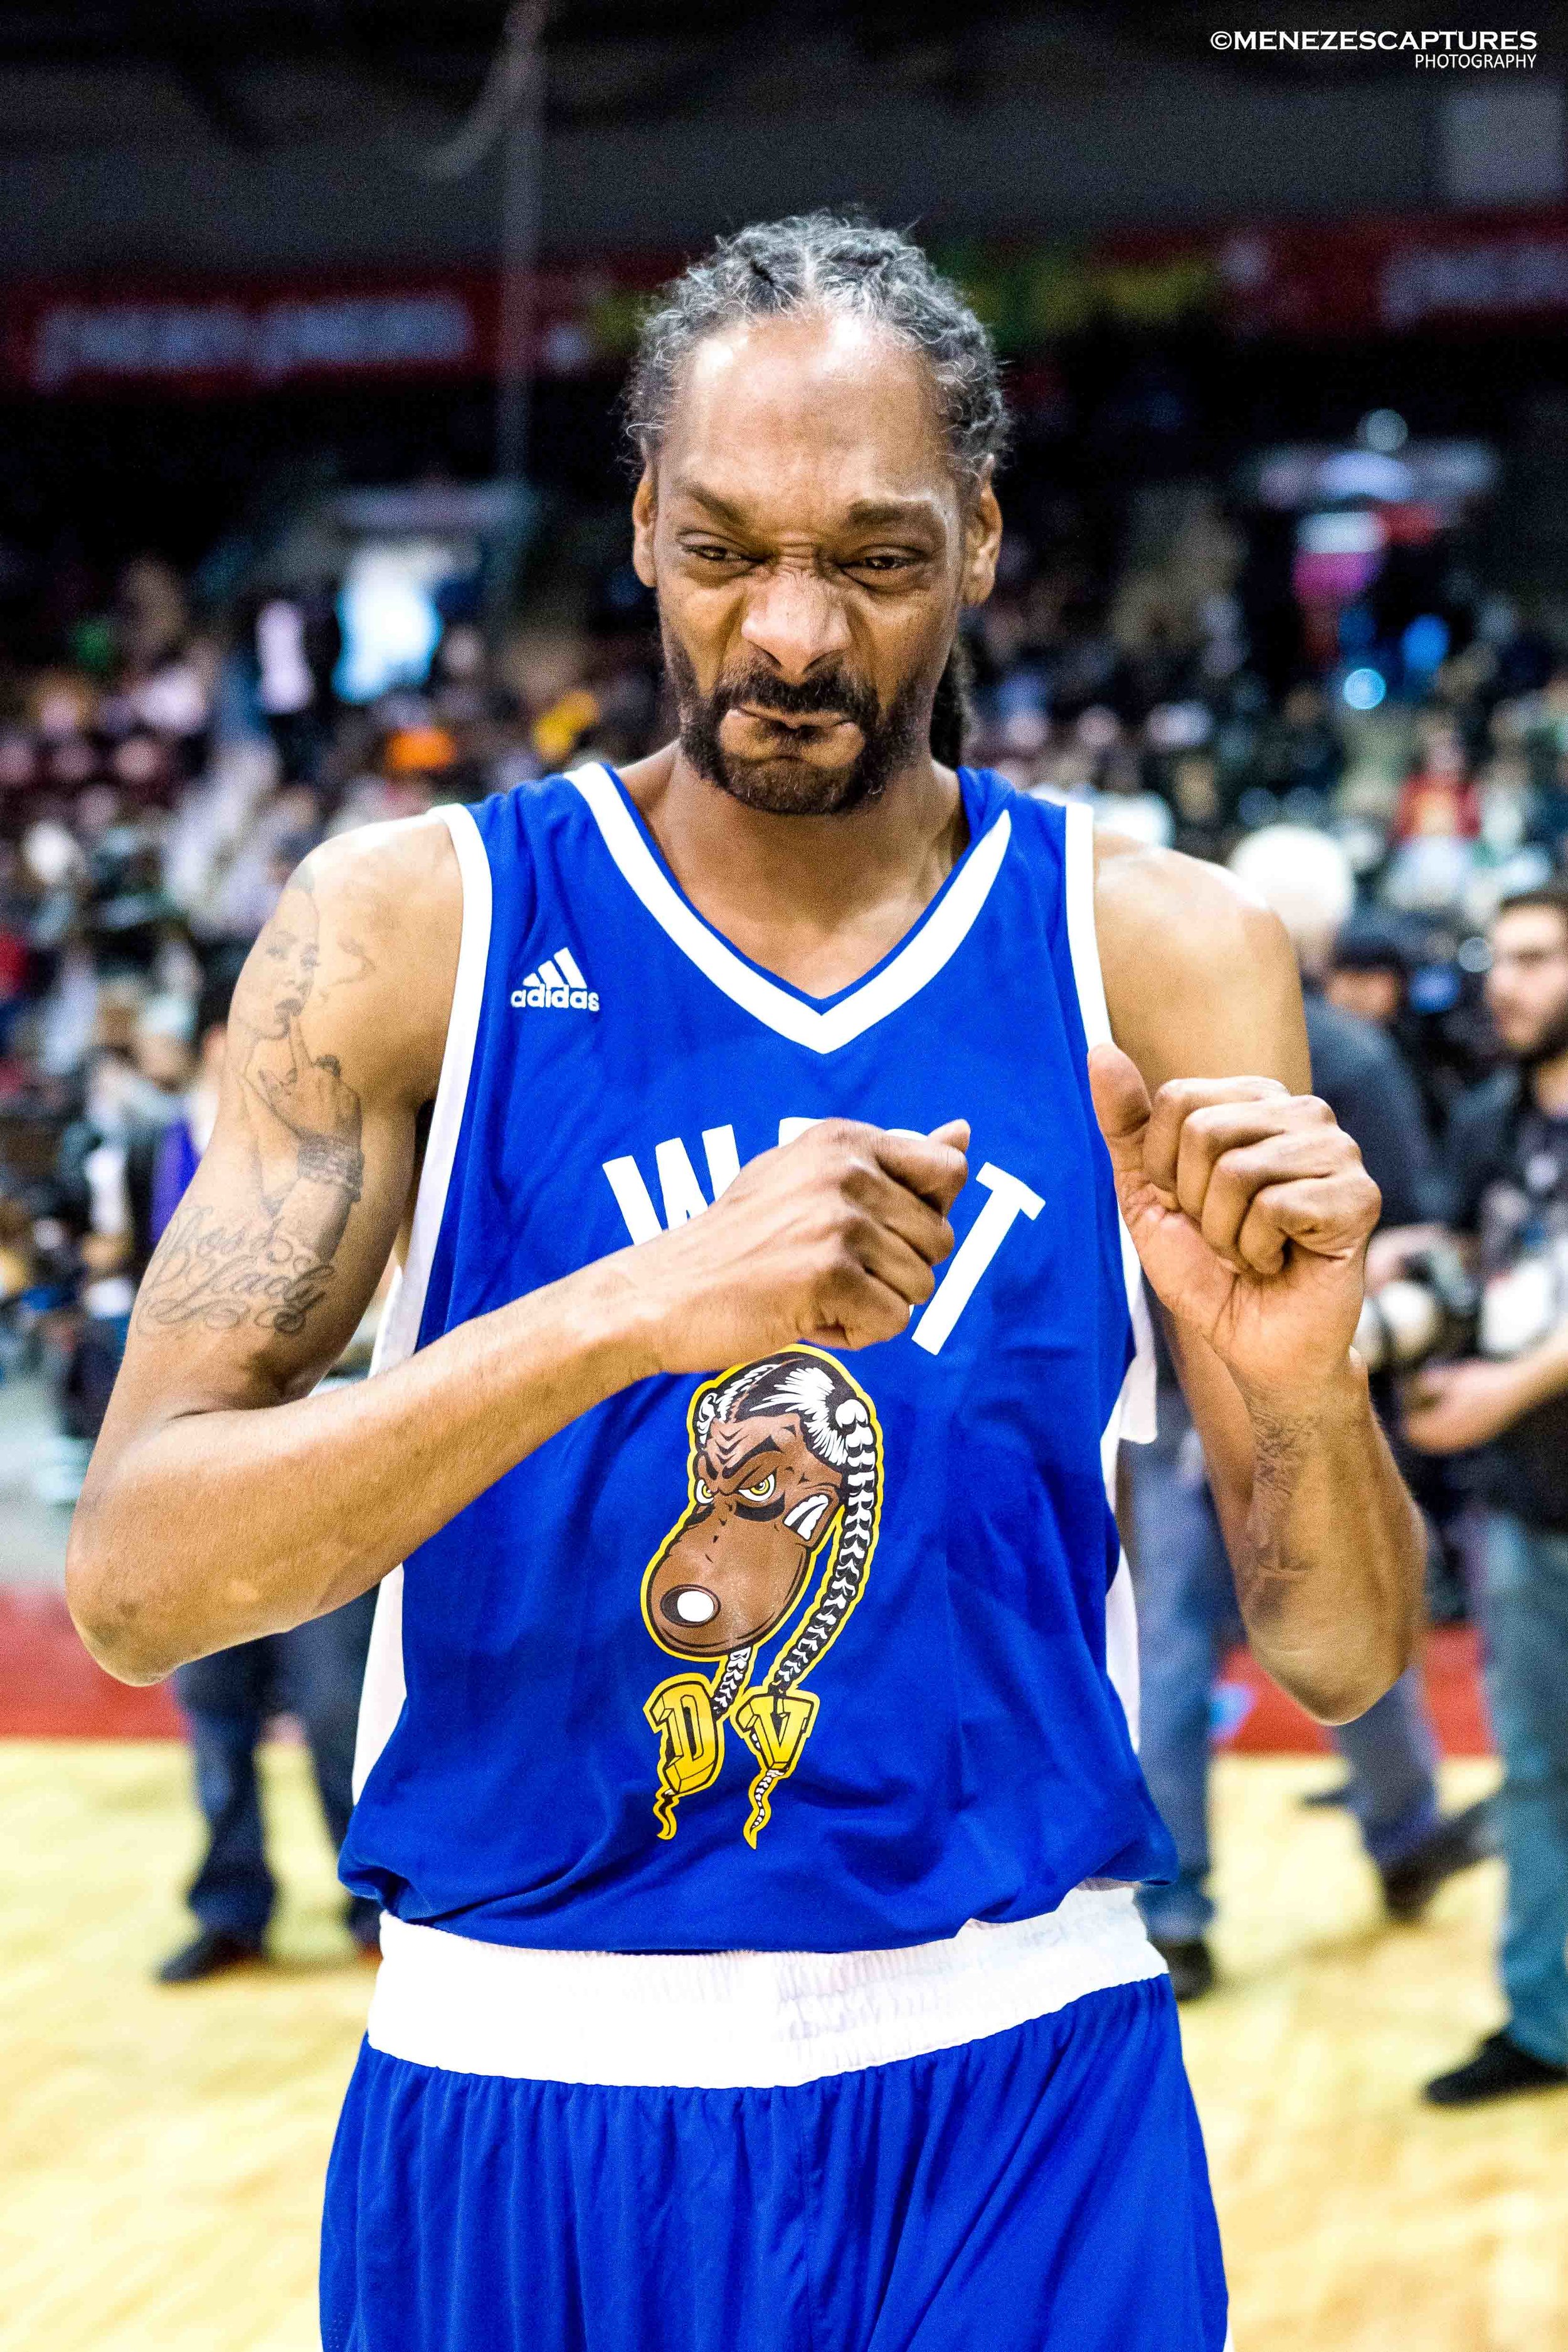 Snoop Dogg at the 2017 NBA All Star Game in Toronto